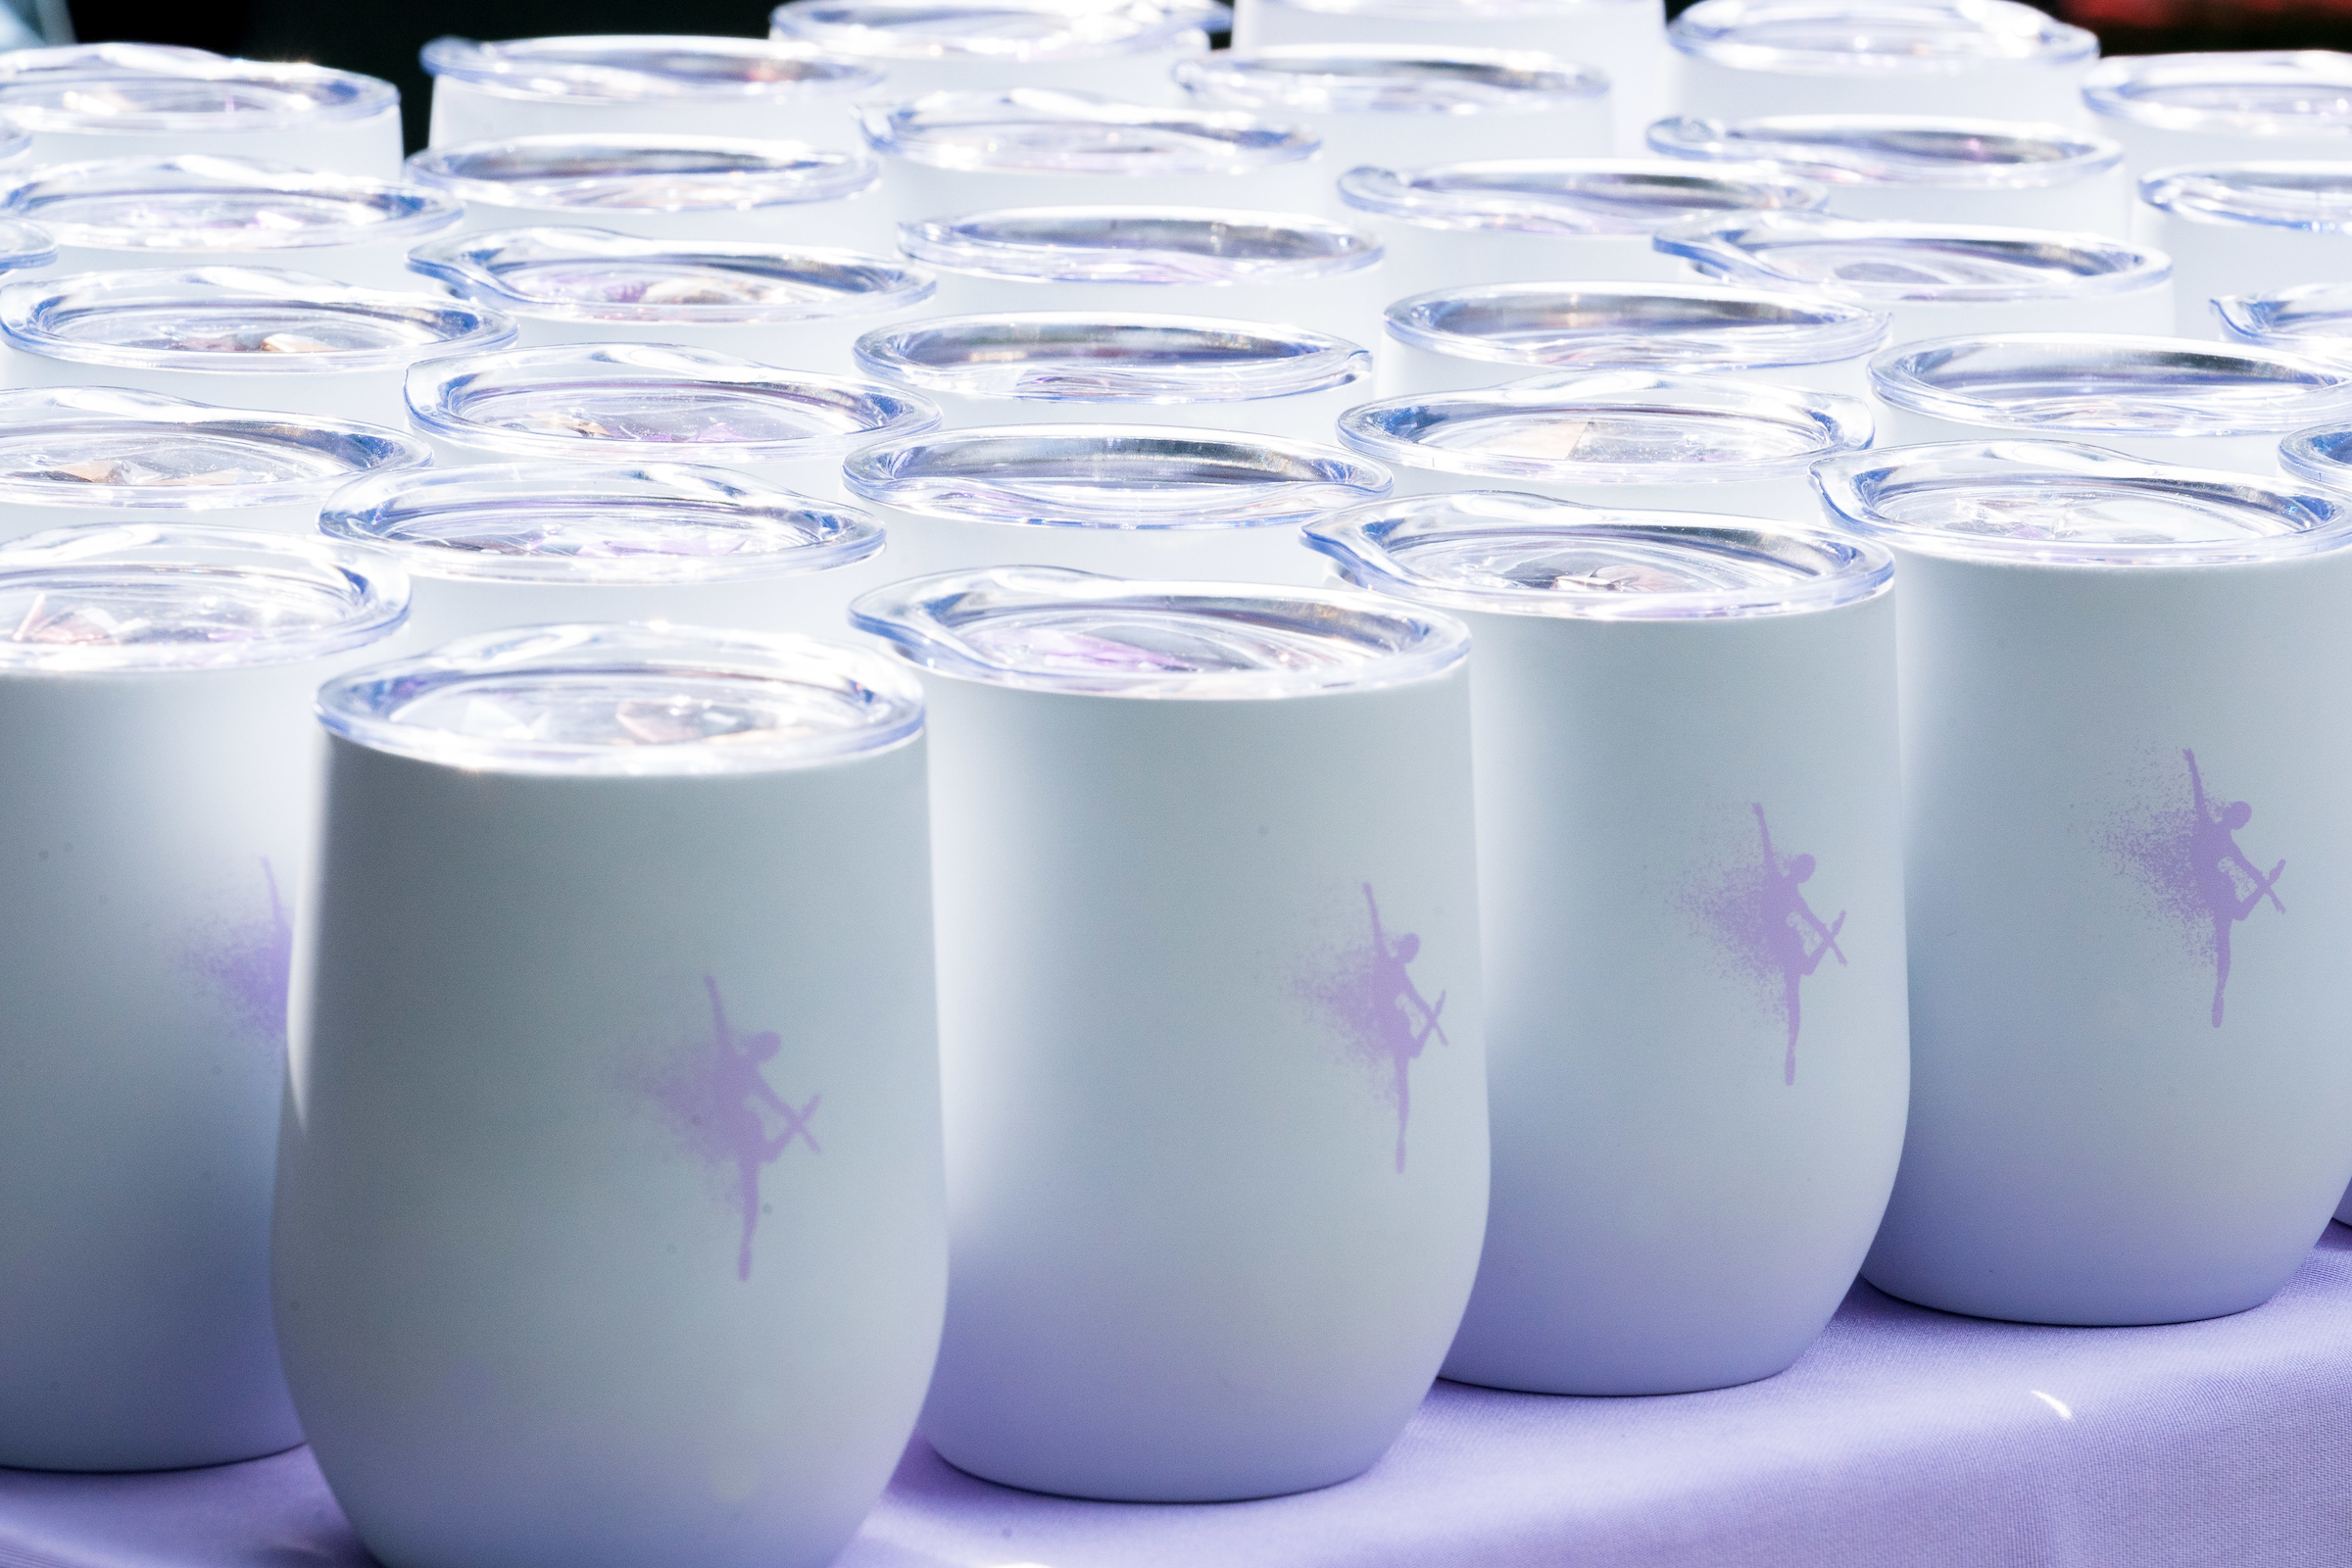 Dancer tumblers | Pop Color Events | Adding a Pop of Color to Bar & Bat Mitzvahs in DC, MD & VA | Photo by: Michael Temchine Photography